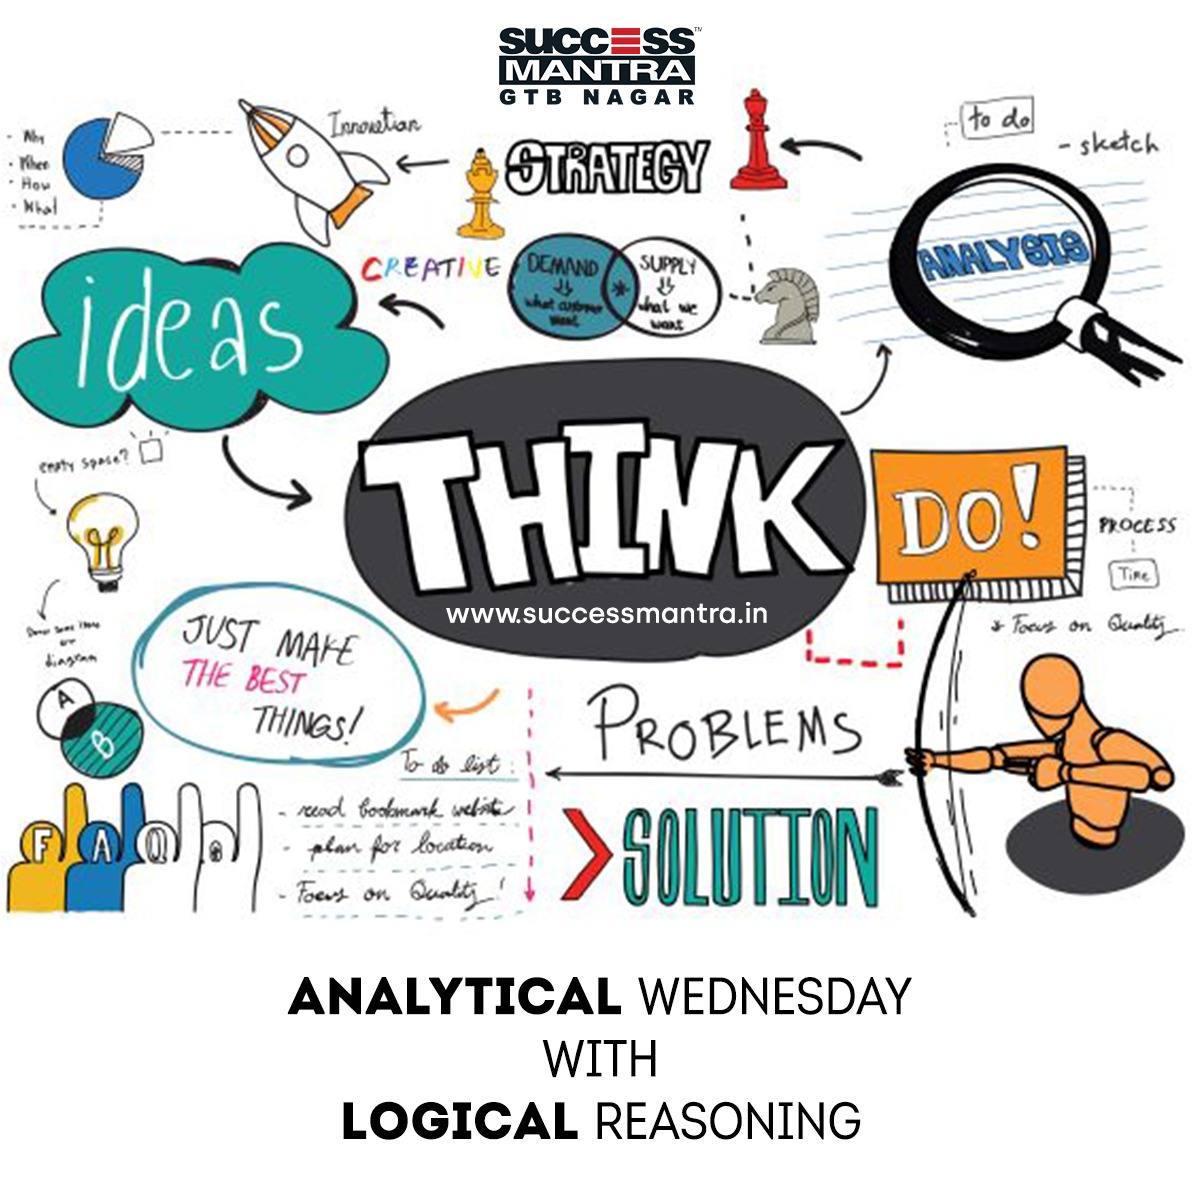 Questions on Logical Reasoning SMLRQ044